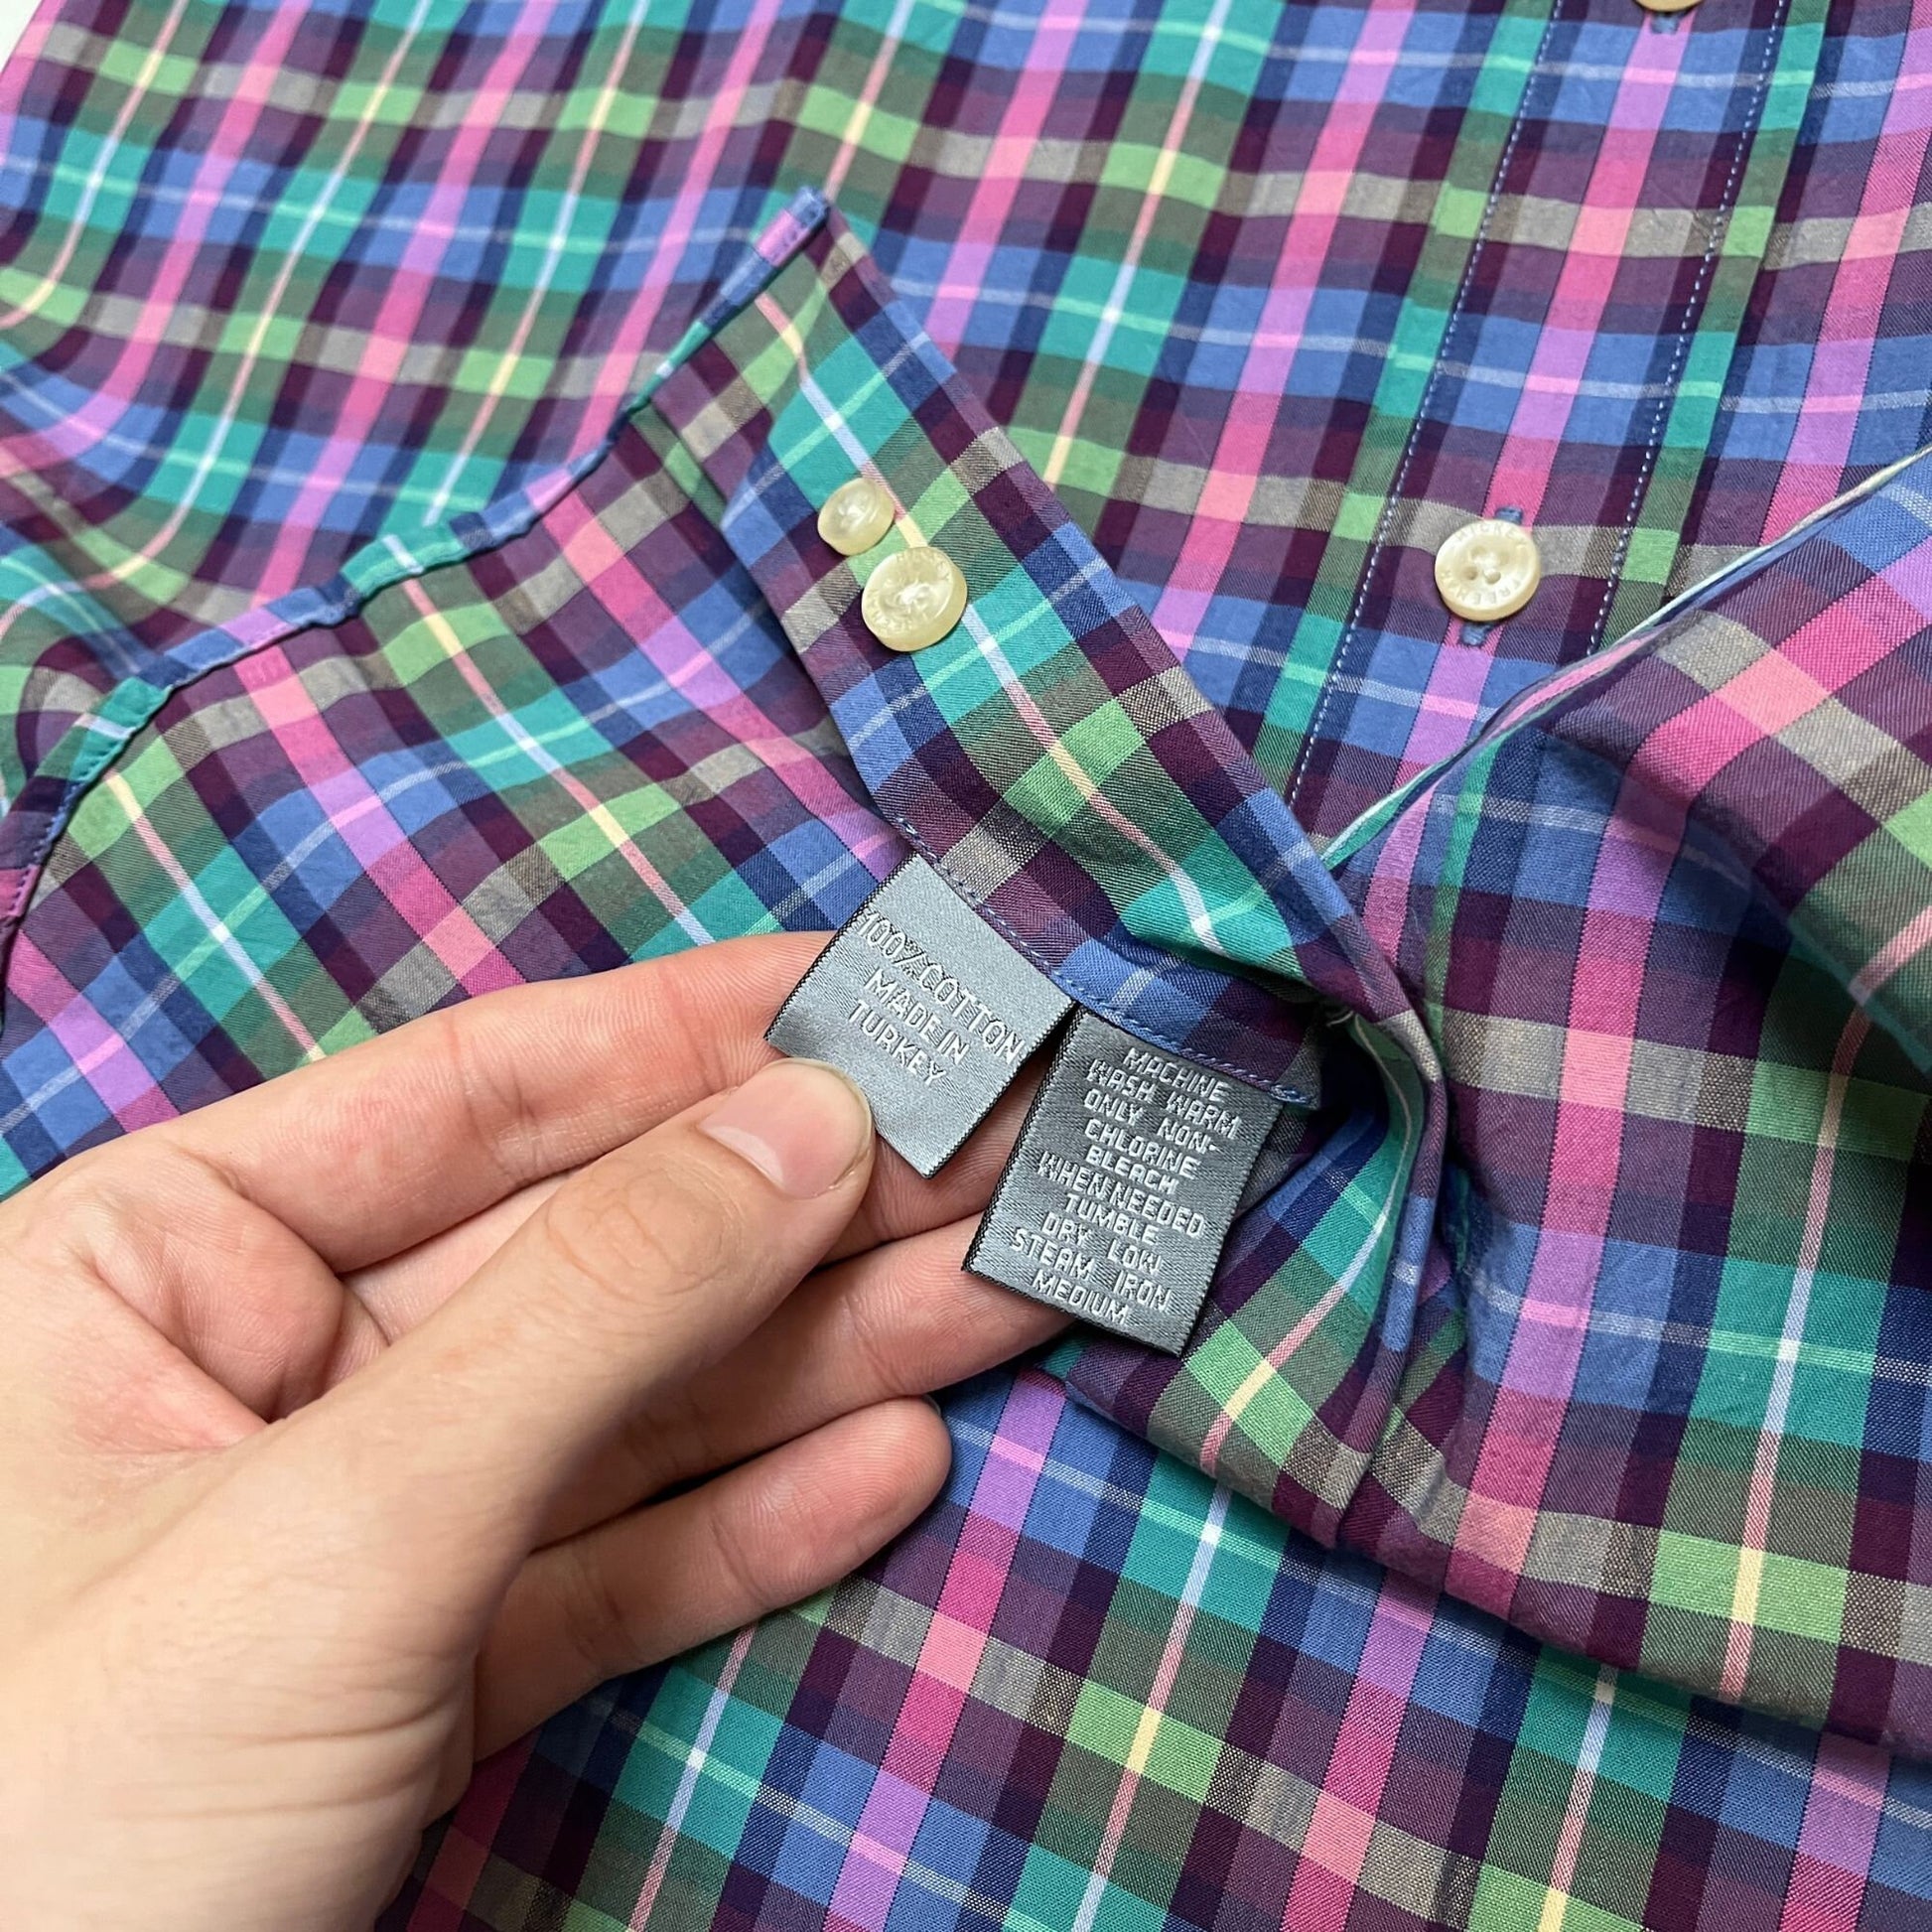 90s men's shirt by Hickey Freeman, size small, vintage 1990s plaid short sleeve teal and purple button down